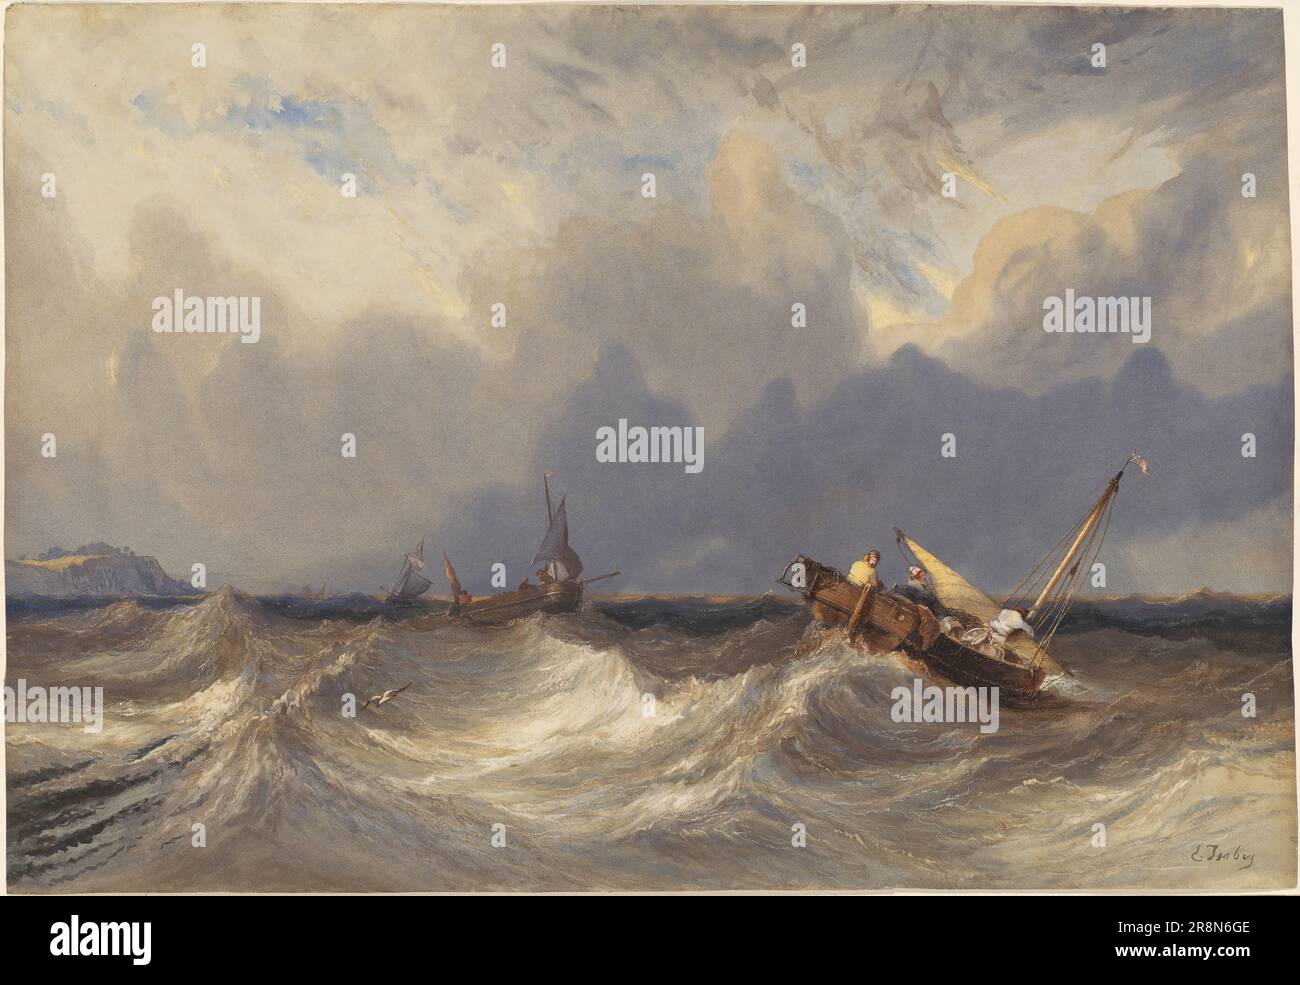 Fishing Boats Tossed before a Storm by Eugène Isabey, 1840, watercolor on wove paper, 93.3x63.9 cm, National Gallery of Art, Landover, Maryland (USA). Stock Photo